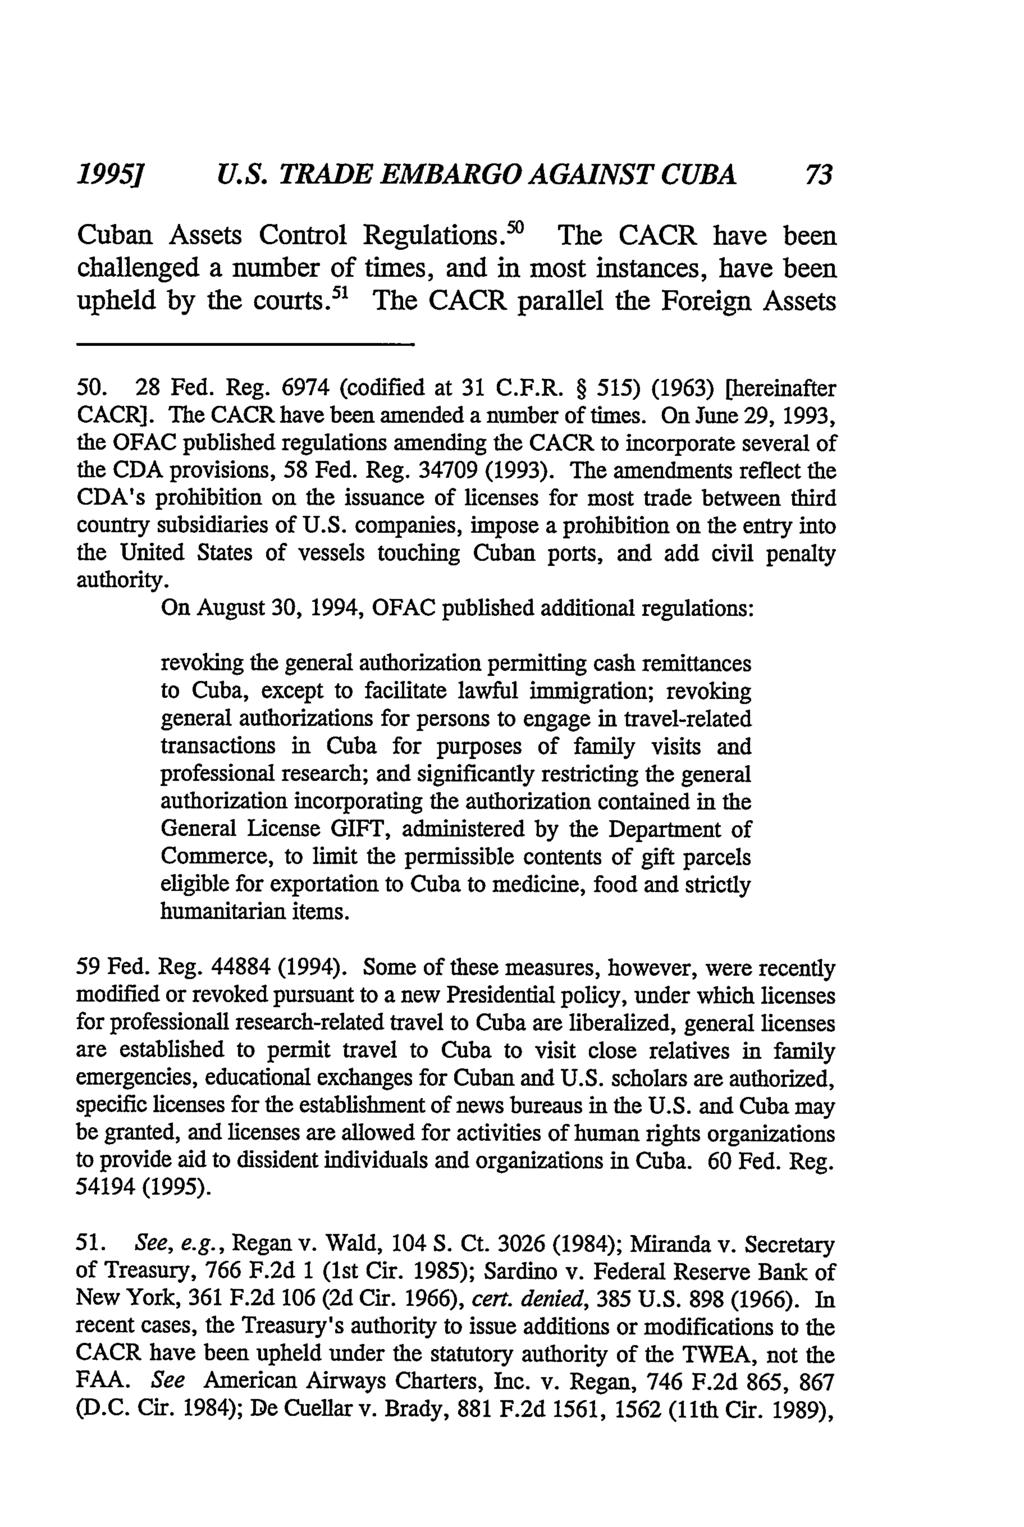 19951 U.S. TRADE EMBARGO AGAINST CUBA Cuban Assets Control Regulations. The CACR have been challenged a number of times, and in most instances, have been upheld by the courts.